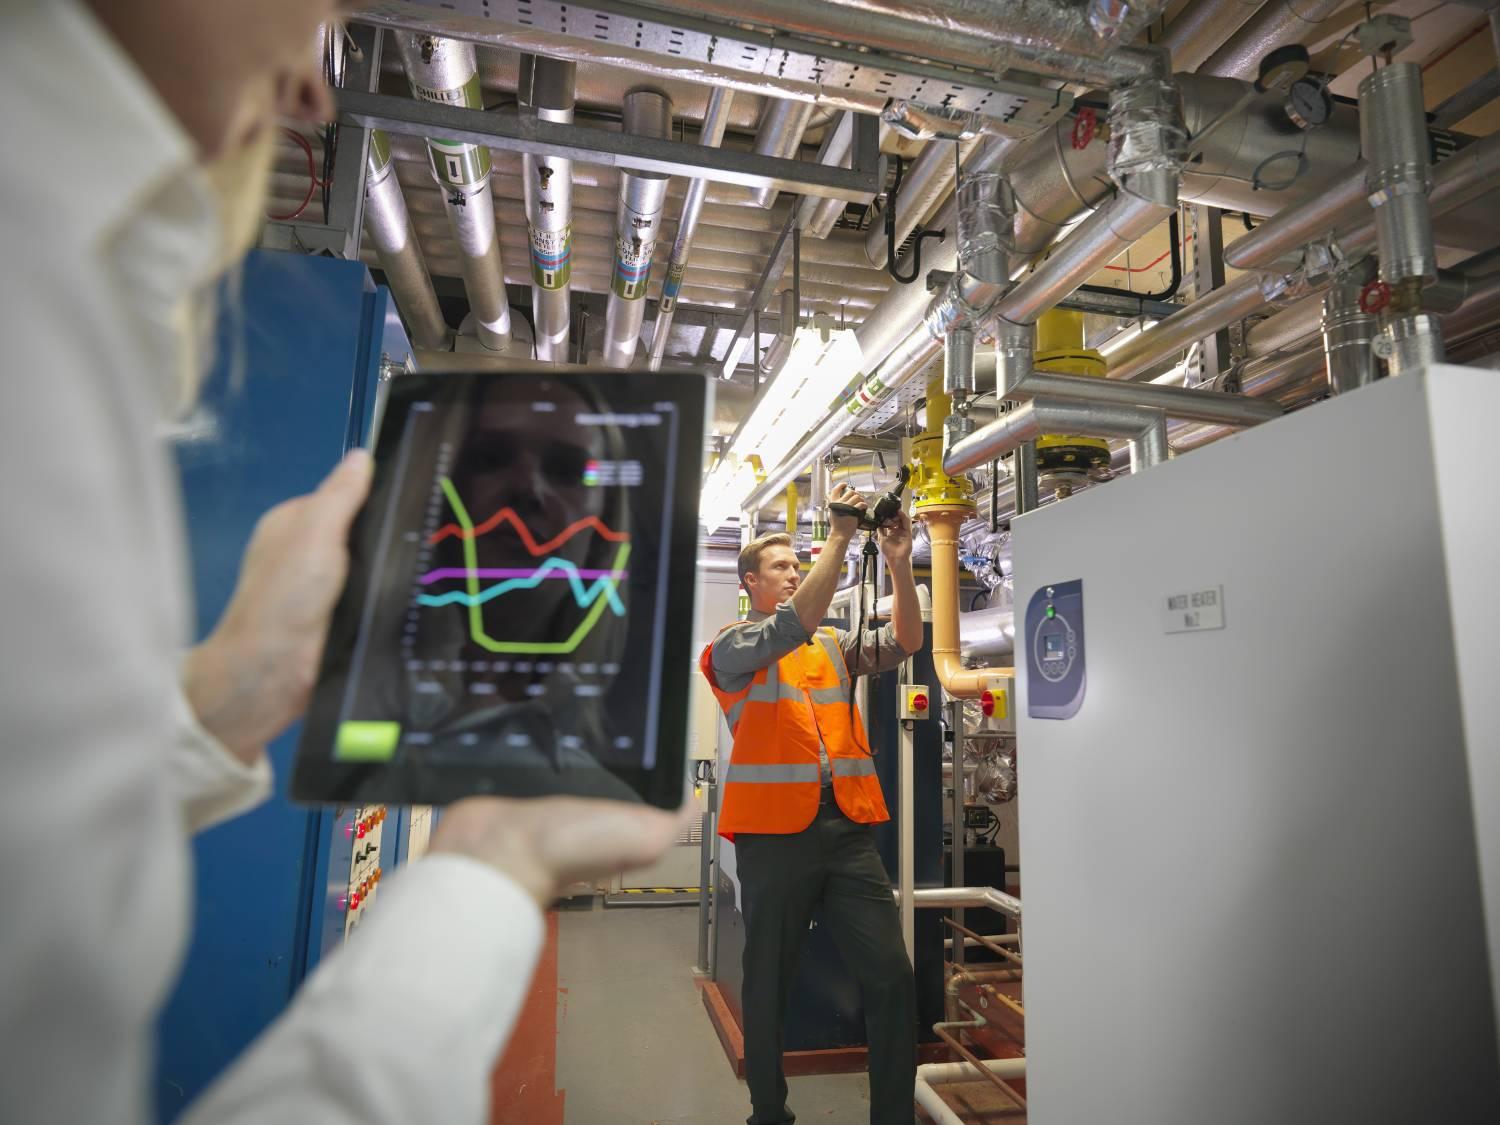 Workers with tablet checking efficiency of heating in boiler room